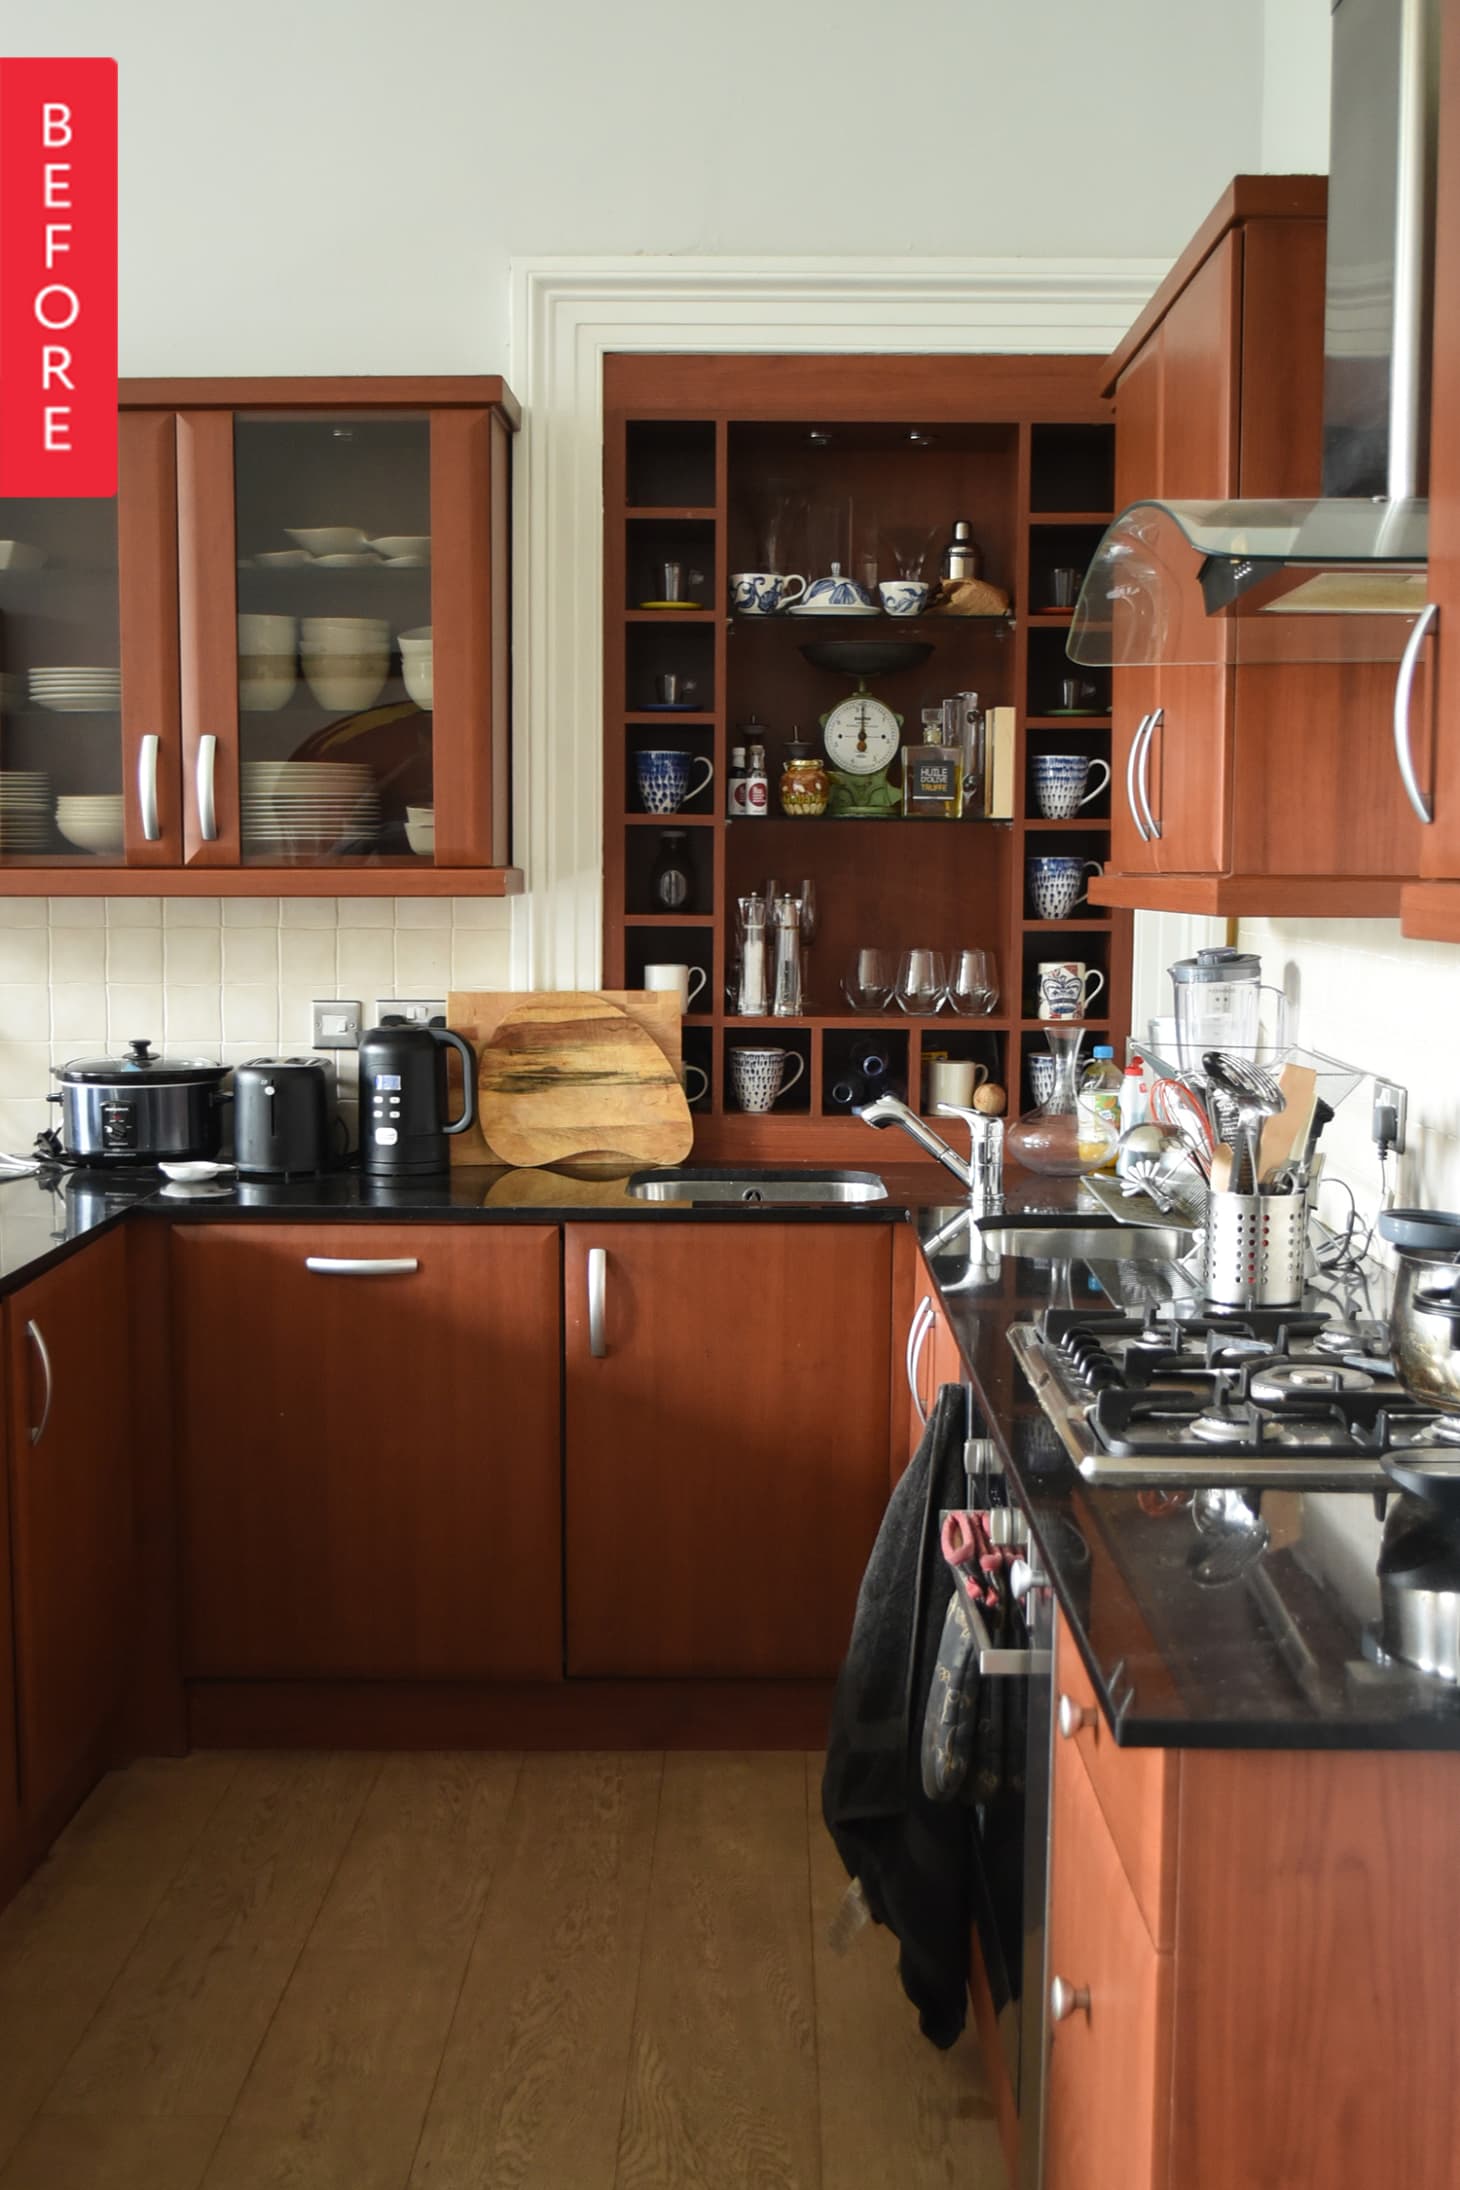 Budget Kitchen Transformations That Cost Under 1,000 Apartment Therapy